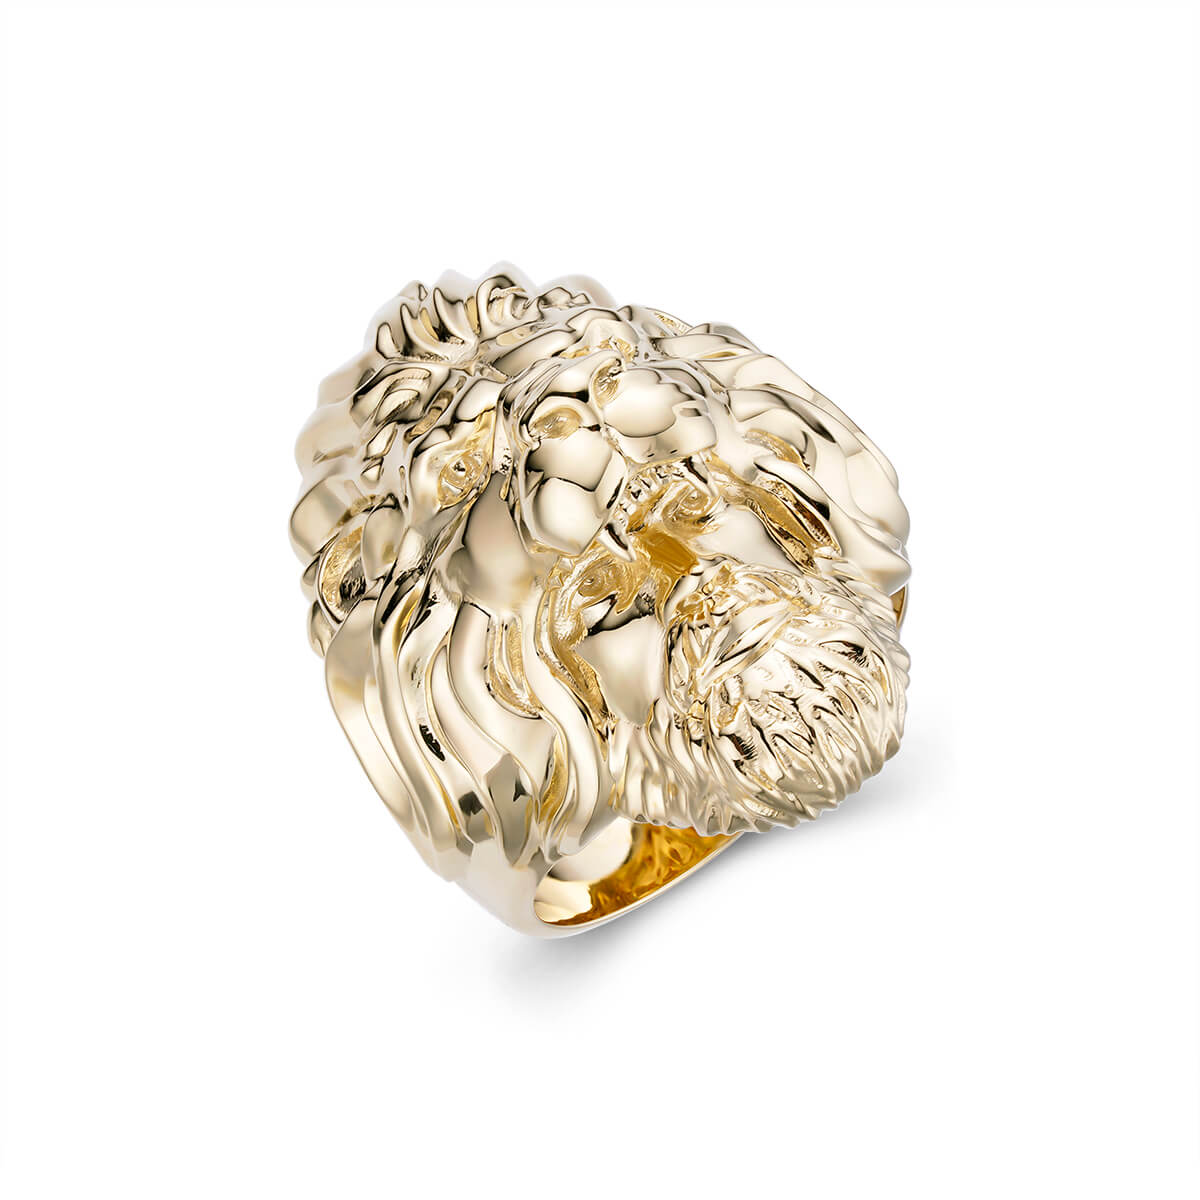 Men's Fine 14k Yellow Gold Textured Band Lion Head Ring (Size 4)|Amazon.com